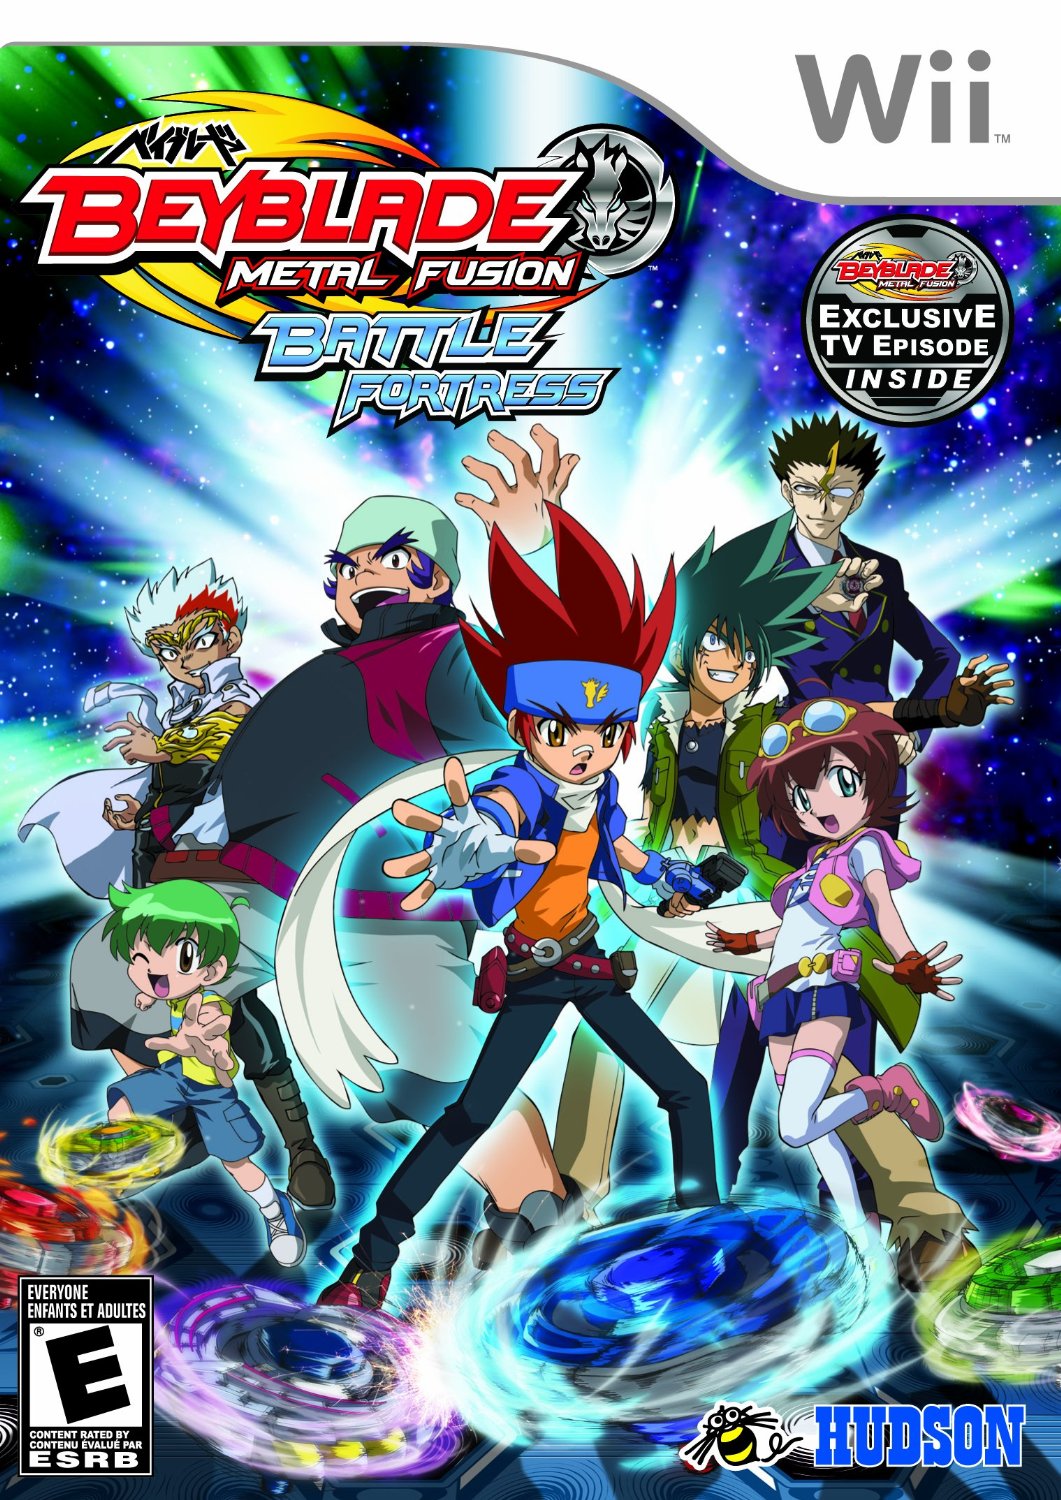 beyblade metal fusion battle fortress demo download